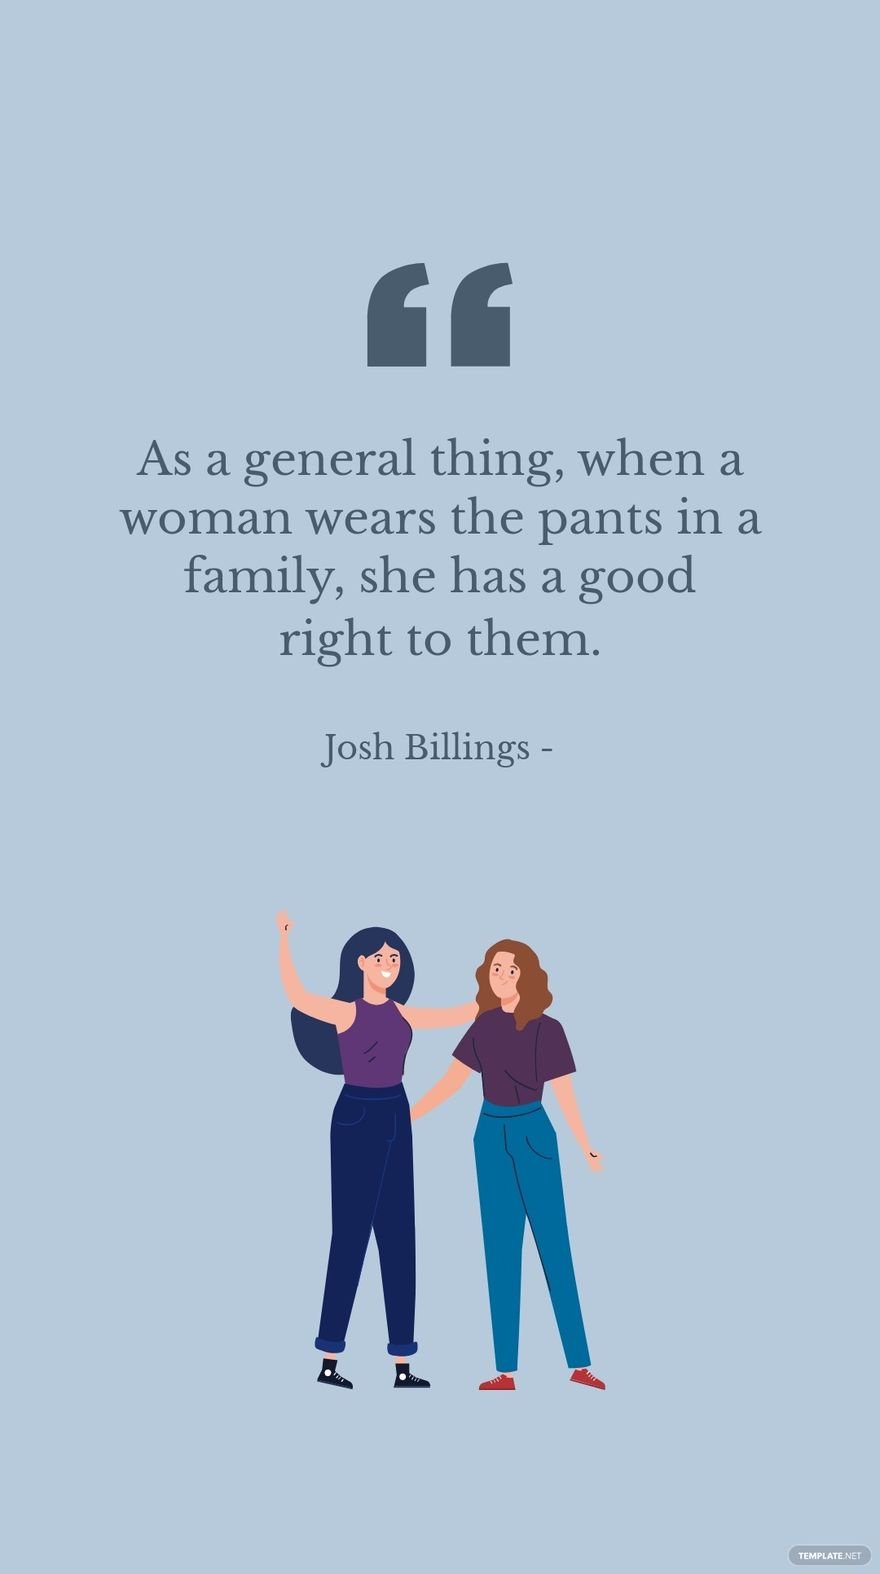 Free Josh Billings - As a general thing, when a woman wears the pants in a family, she has a good right to them.